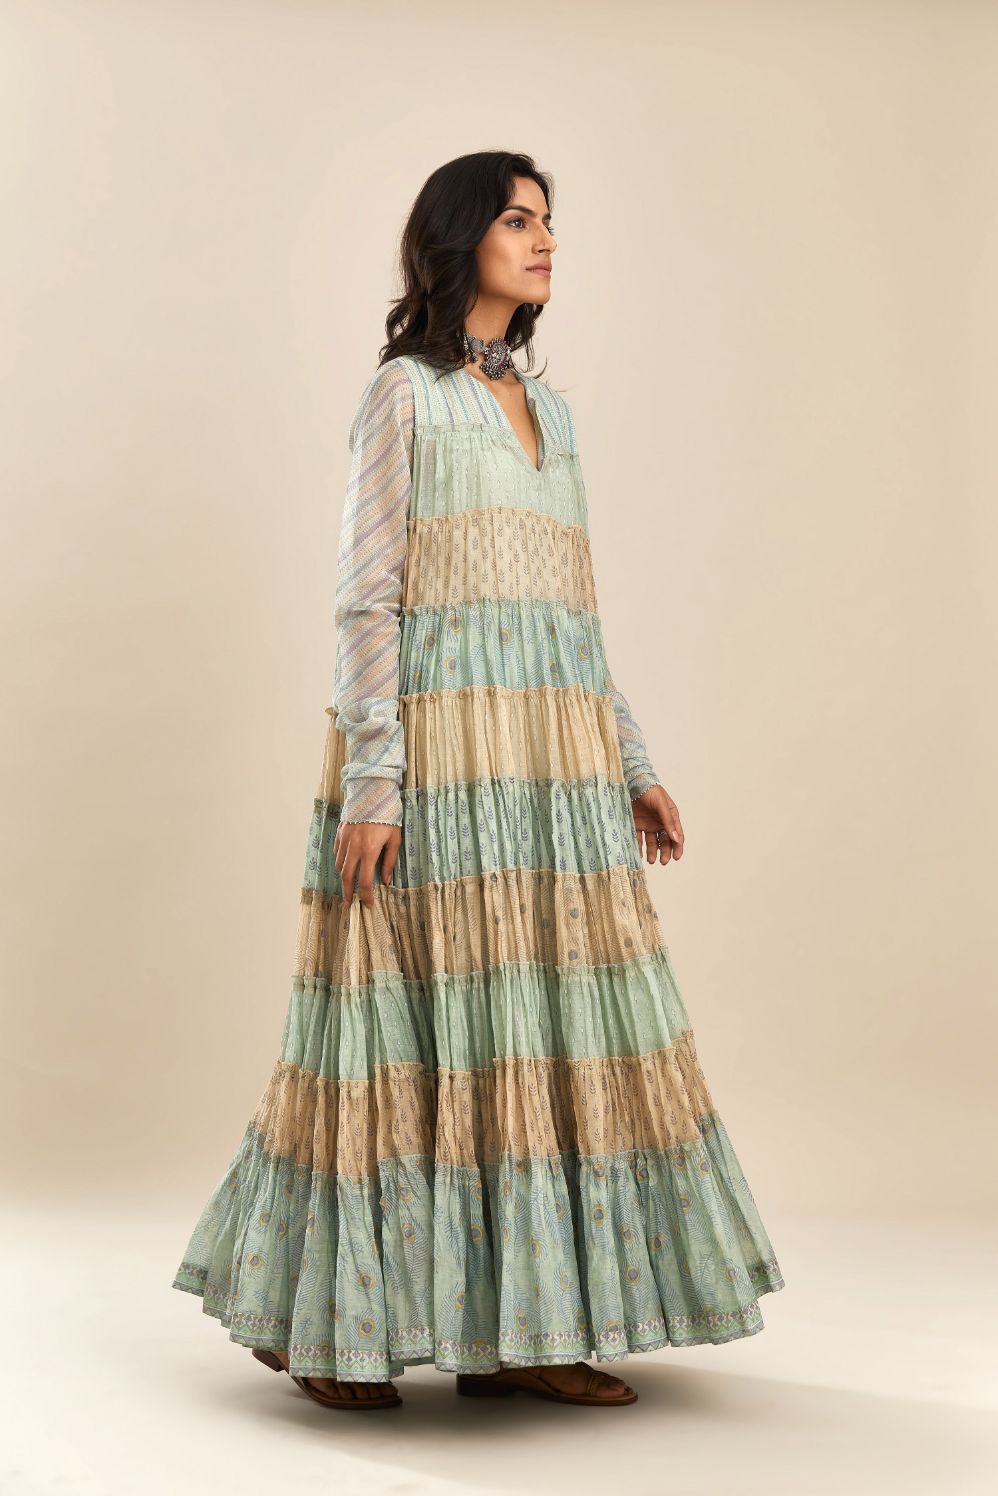 Hand block printed multi-tiered kurta dress set with churi sleeves and bead handwork detailing at neck and sleeves.